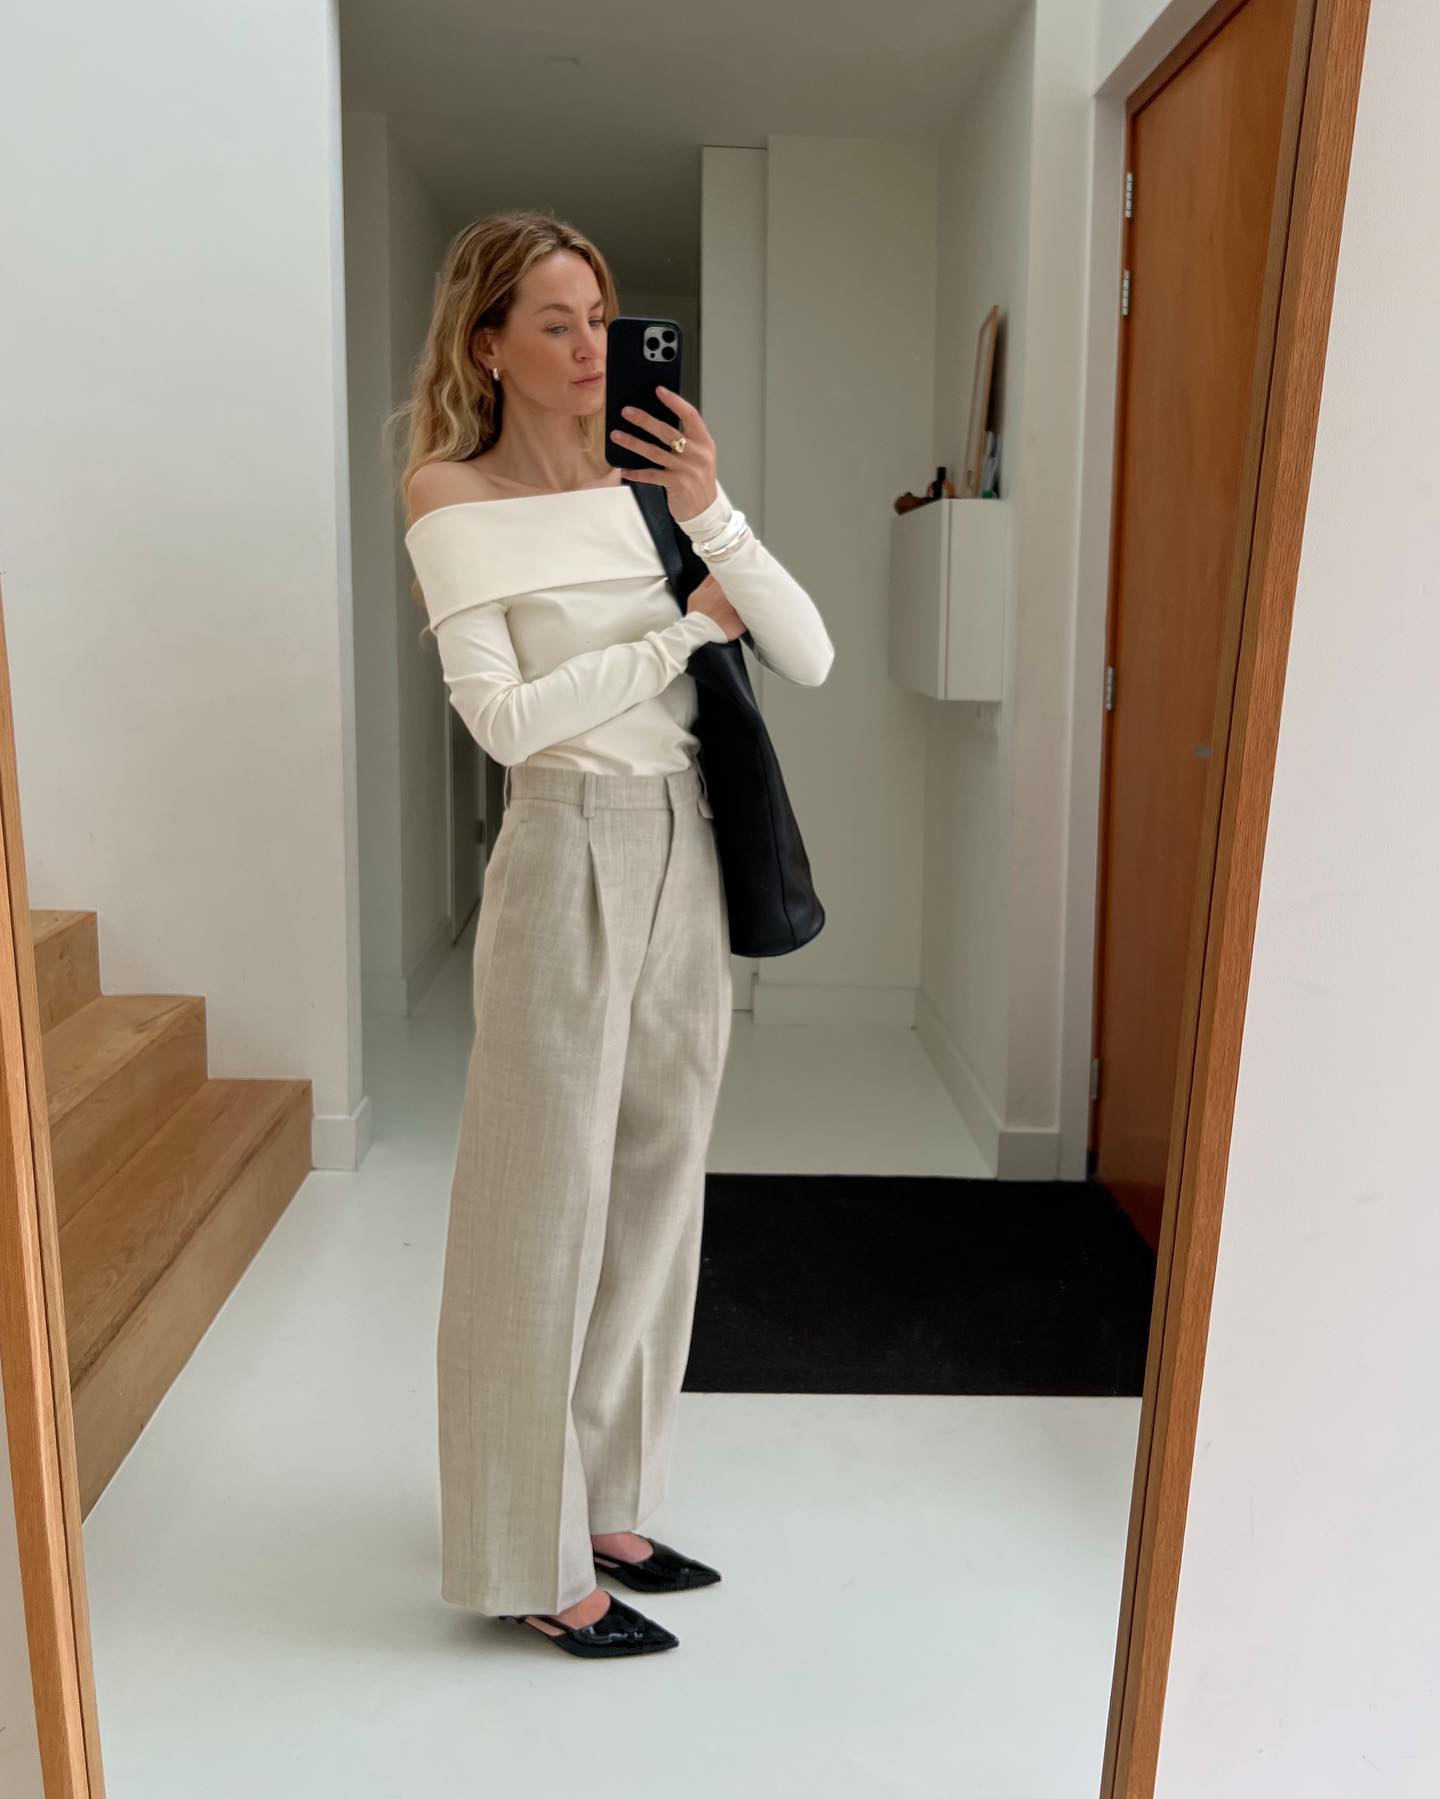 fashion influencer Anouk Yve poses for a mirror selfie wearing a cream off-shoulder top, oversize black tote bag, tan linen pants, and black slingback heels